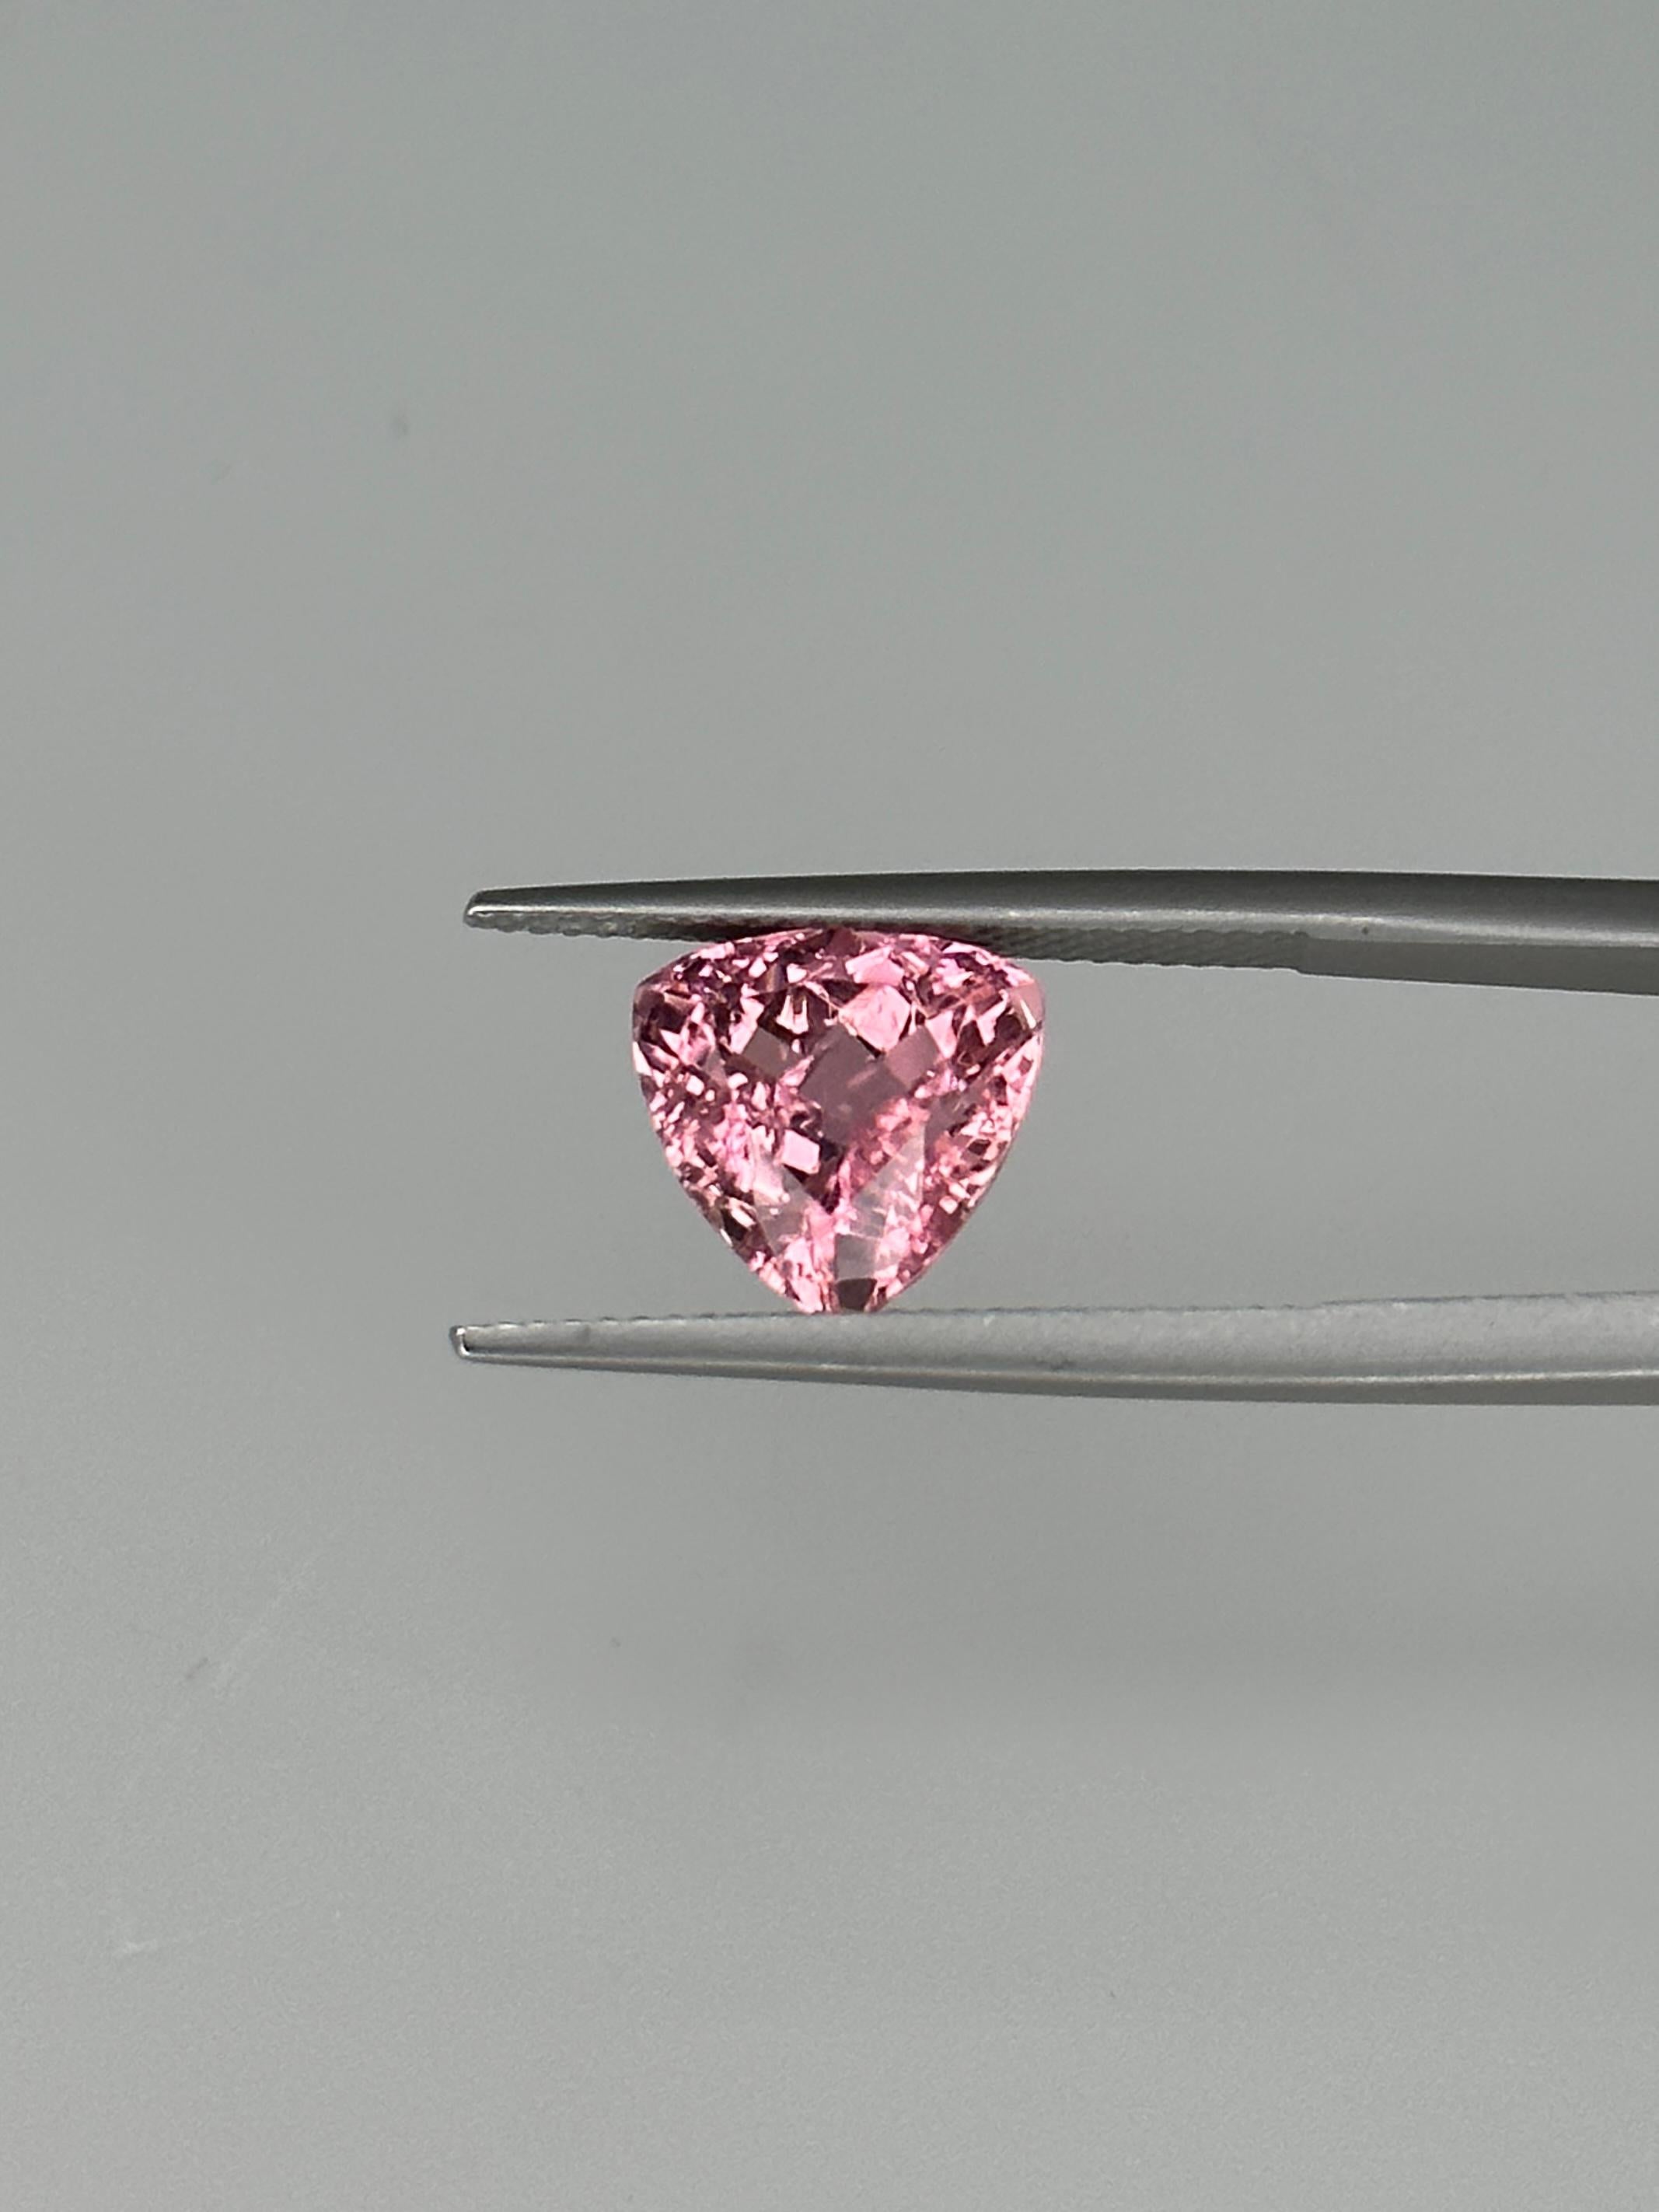 A wonderful Trillion-cut, Baby-Pink Tourmaline from Mozambique, Africa

Weight: 3.81 Carats
Shape: Trillion
Crown: Modified Brilliant
Pavilion: Step
Gem Dimensions: 10.29 x 10.10 x 6.62 mm
Color: Pink

Gem Type: Tourmaline
Gem Variety: Natural